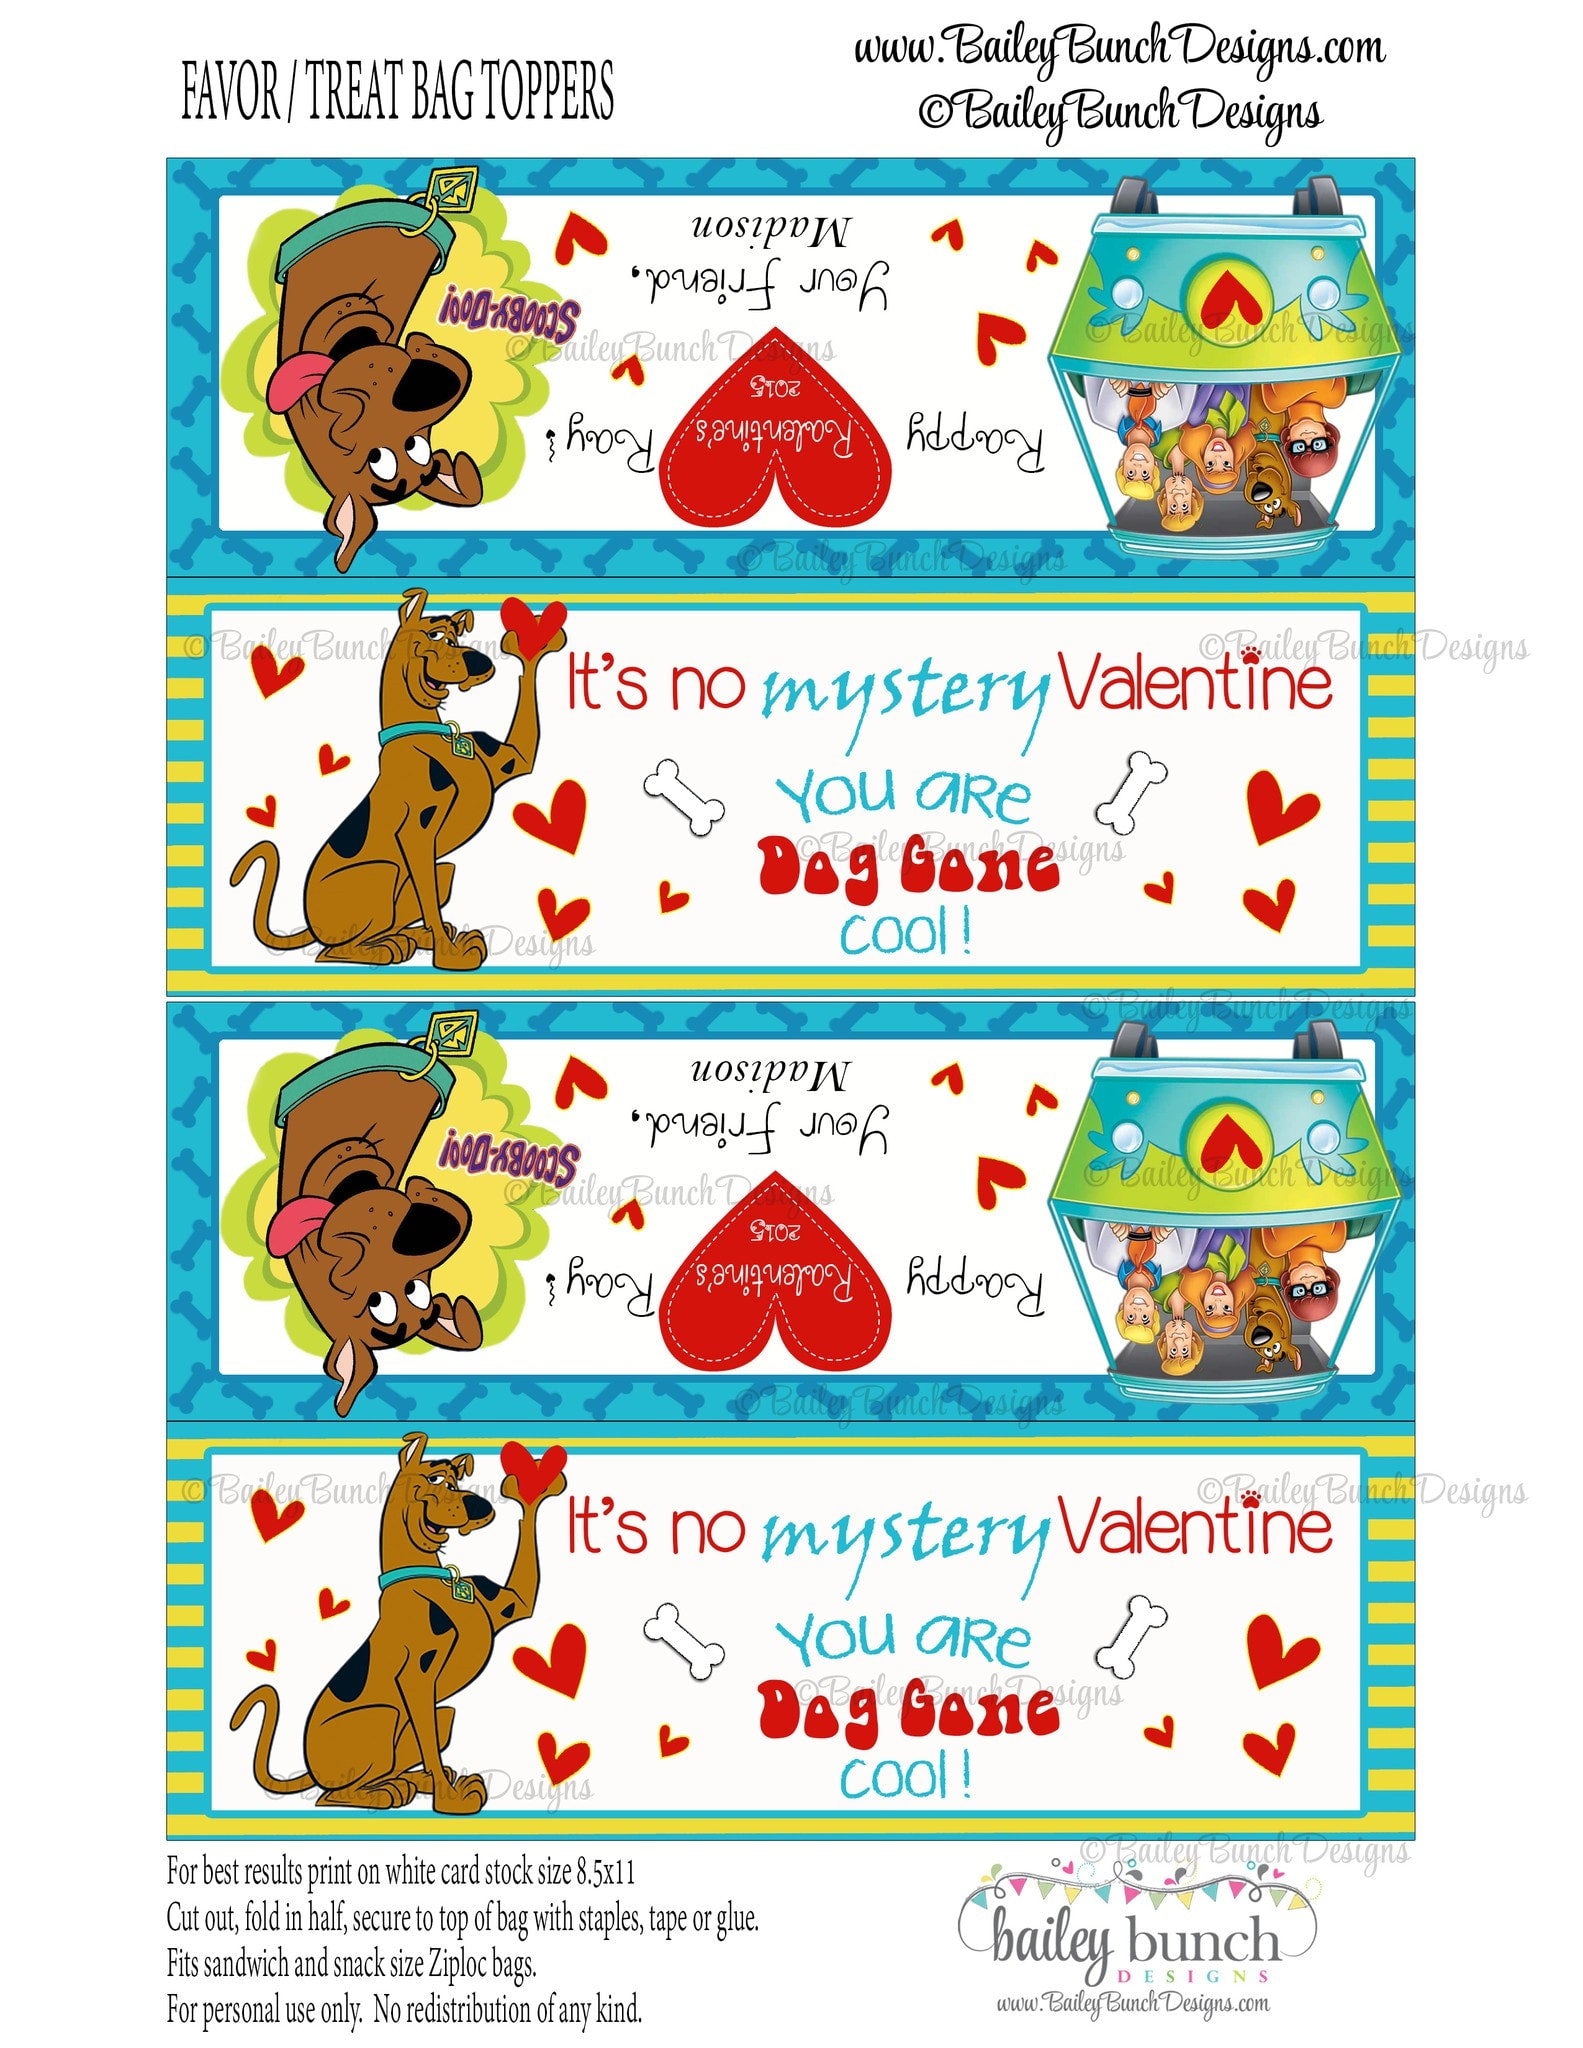 Scooby Doo Valentine Bag Toppers Scooby Doo Valentines VDAYSCOOBY0520